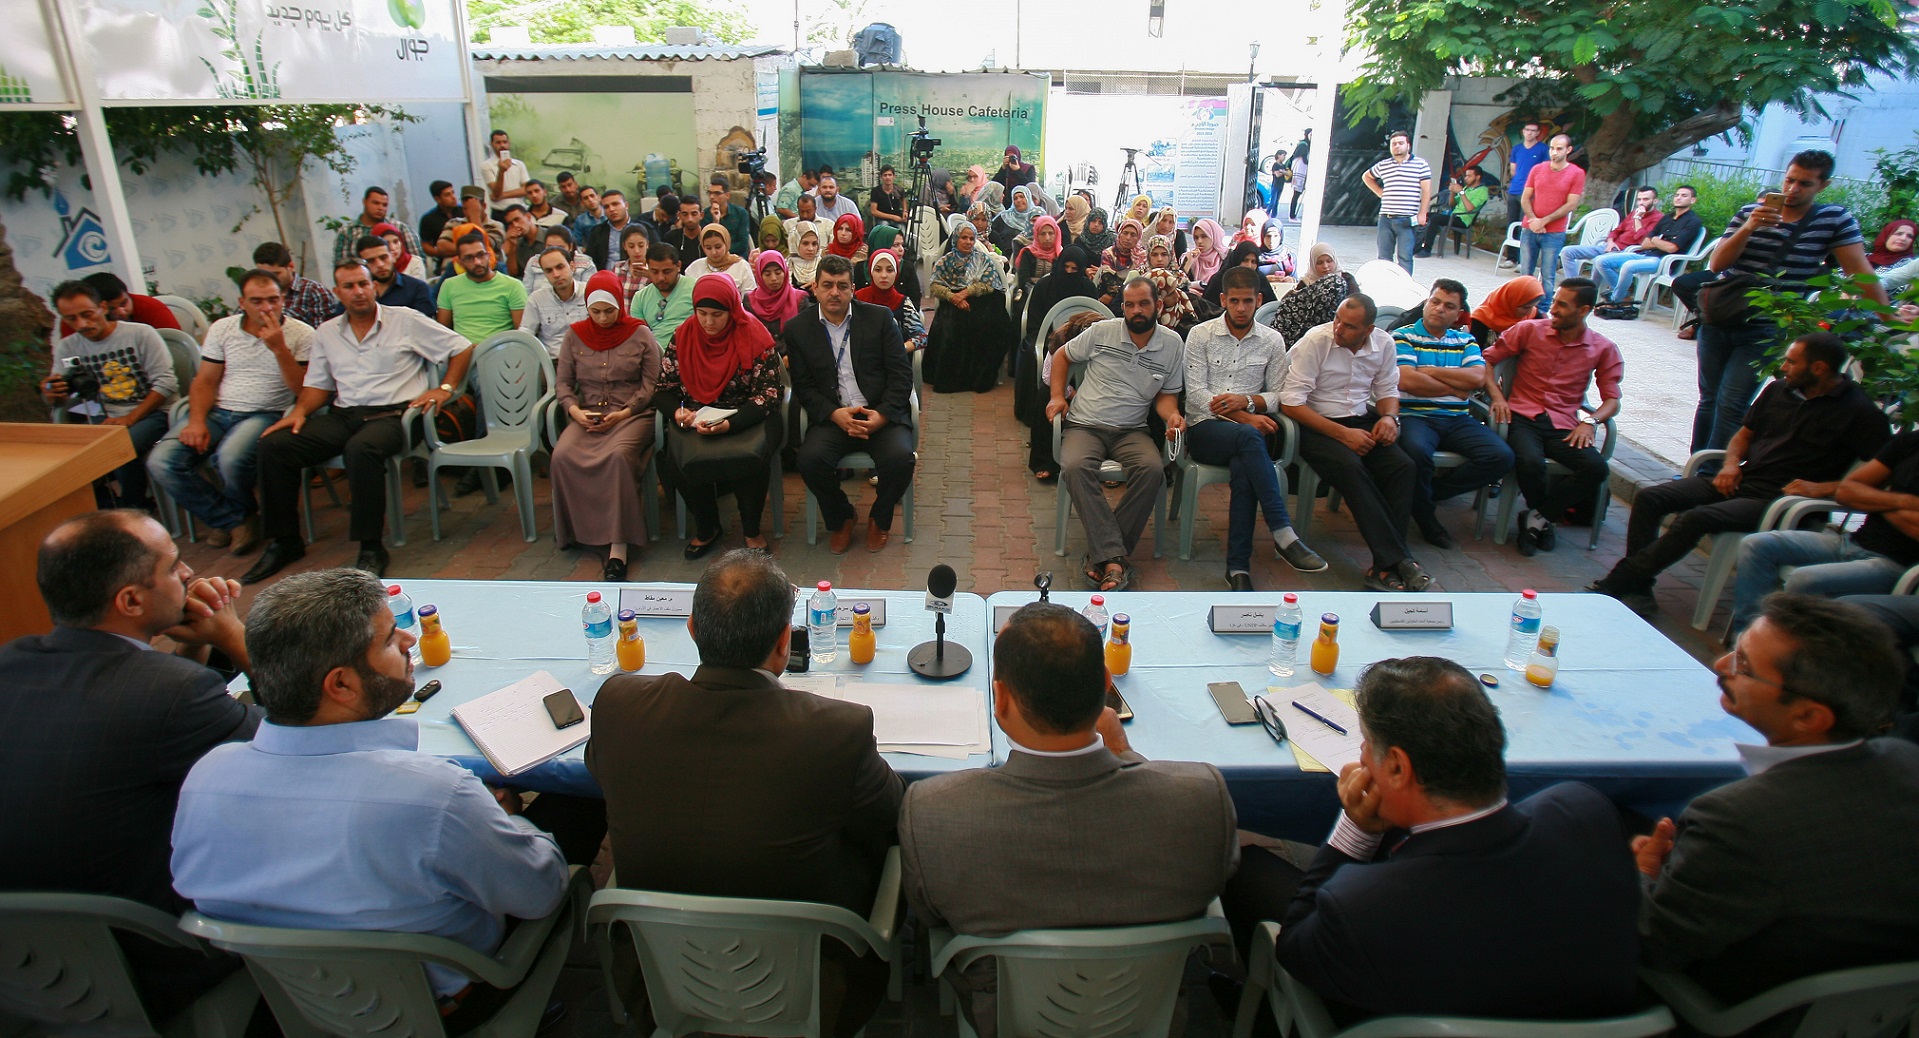 Press House Organize a Meeting Between Displaced People and Officials